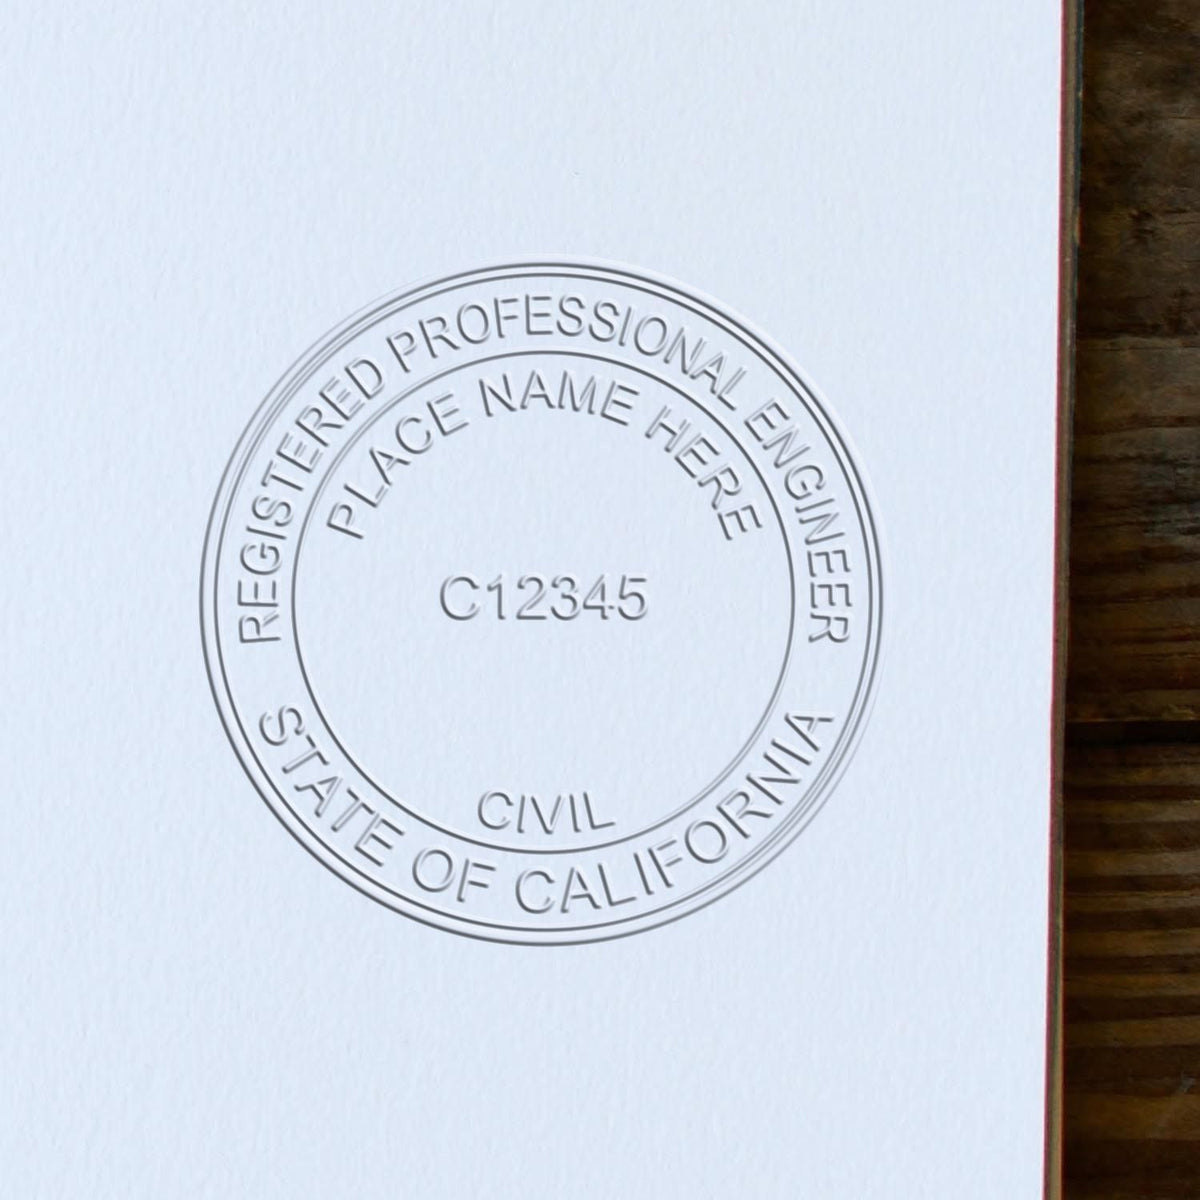 A photograph of the California Engineer Desk Seal stamp impression reveals a vivid, professional image of the on paper.